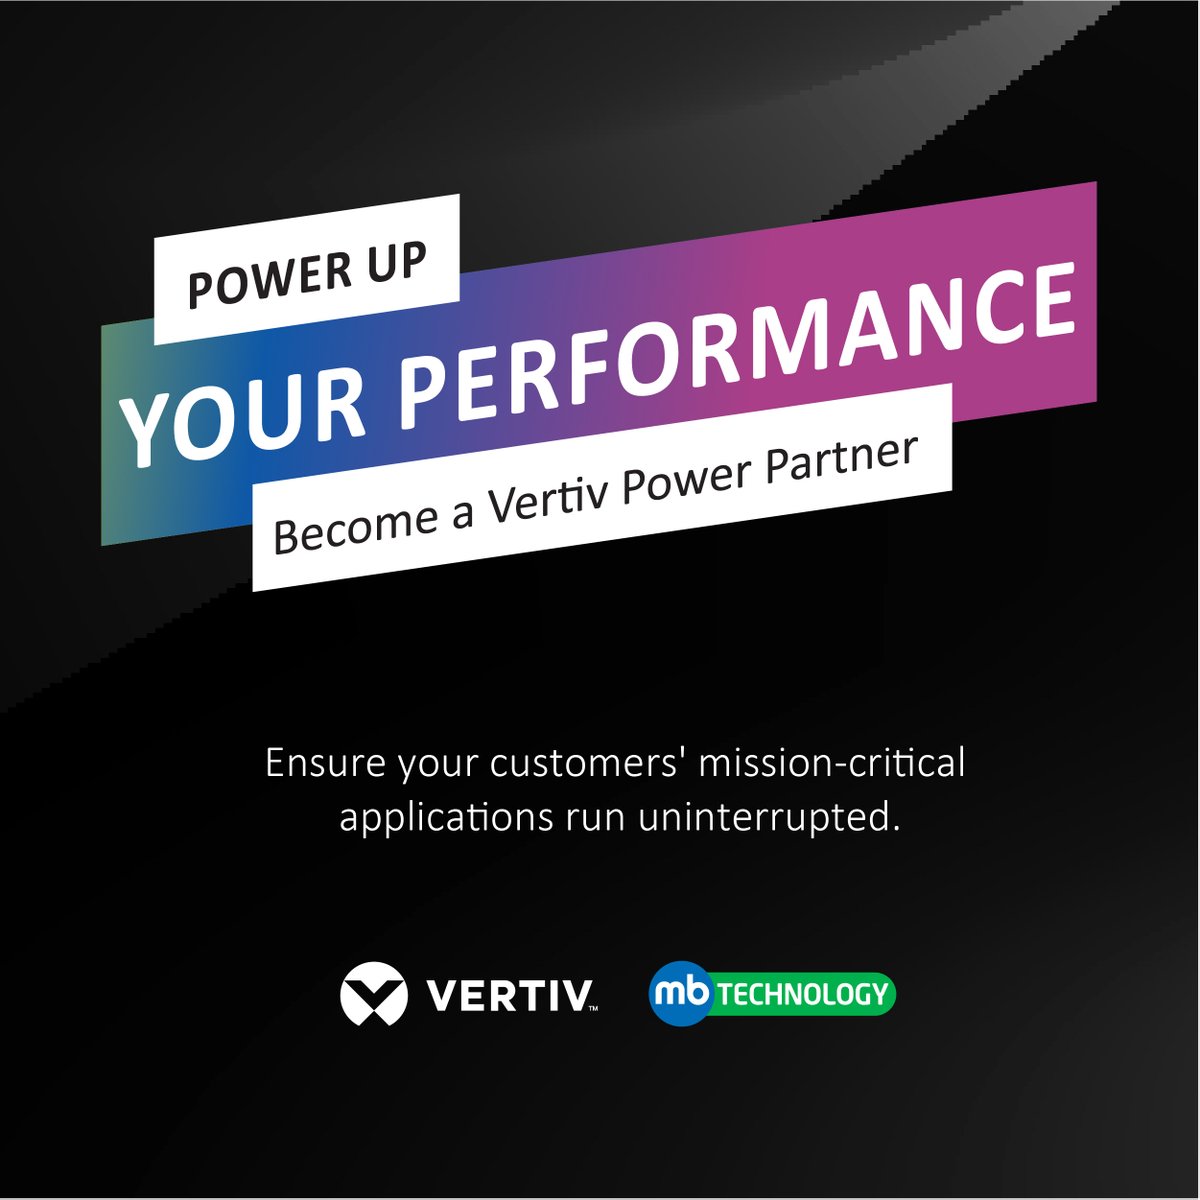 🤝 Comprehensive product range
🤝 Gain a competitive edge

Learn more about Vertiv Partners EMEA Program here : ow.ly/Yw9p50Refv0 

#WisdomWednesday #Vertiv #PartnerProgram #CriticalInfrastructure #DataCentres #TechPartnerships #PartnerWithVertiv #MBTechnology